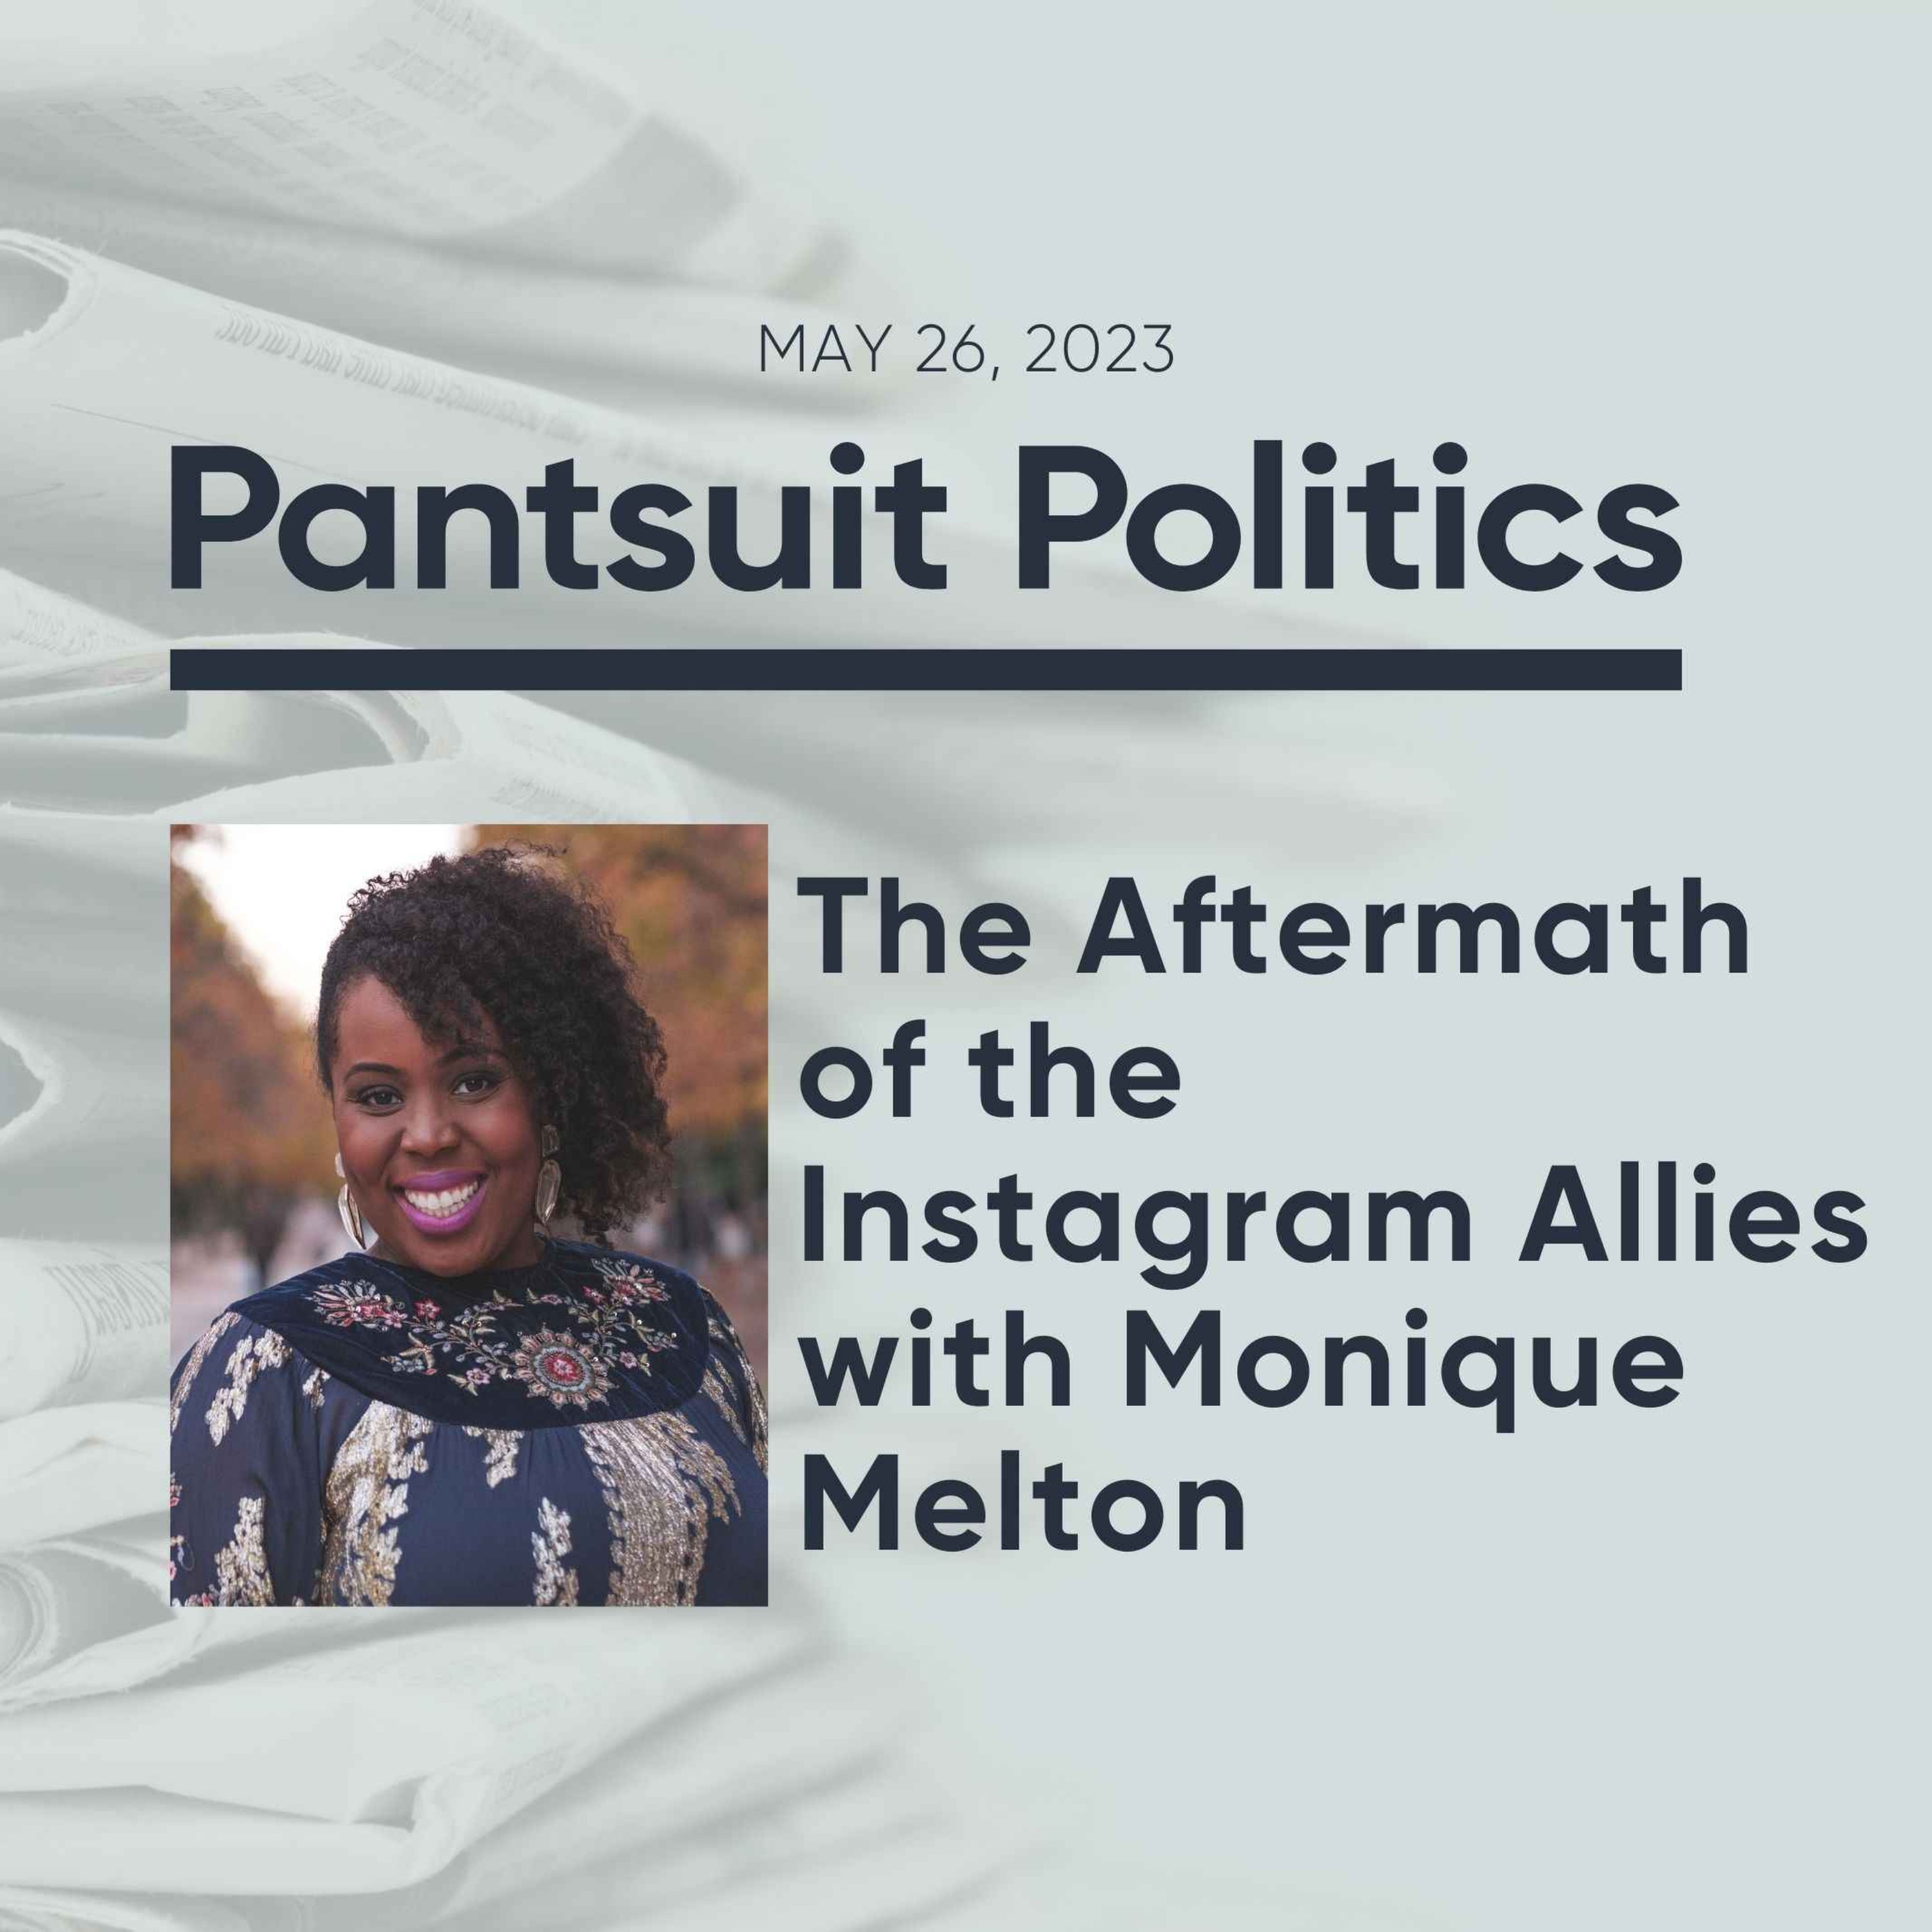 The Aftermath of the Instagram Allies with Monique Melton